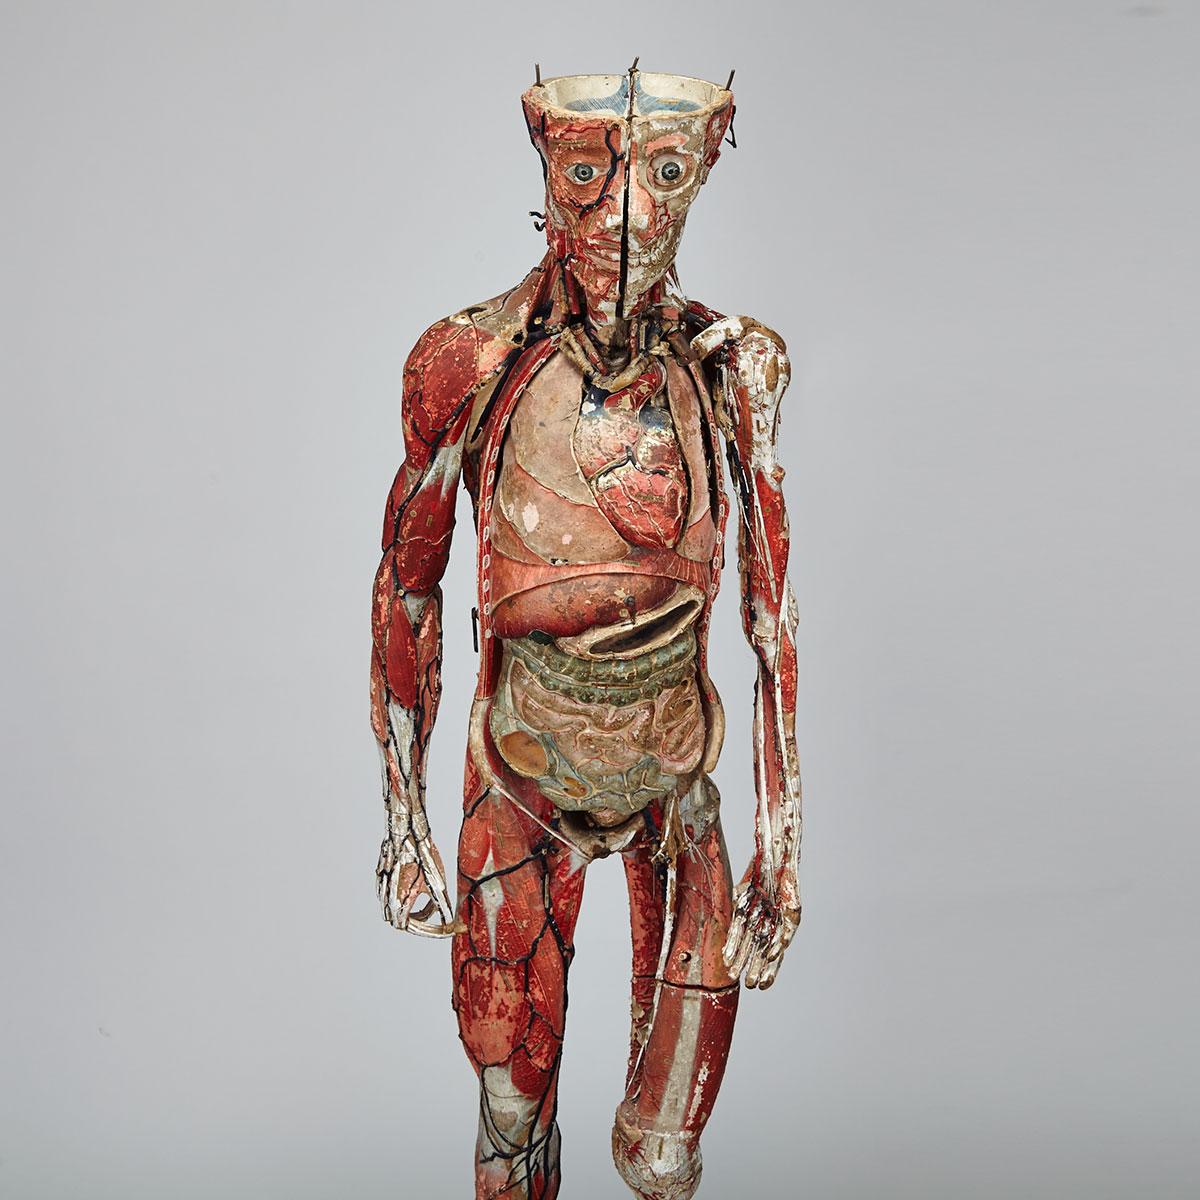 French Polychromed Composite Anatomical Model by Louis Thomas Jerome Auzoux (1797-1880), 19th century